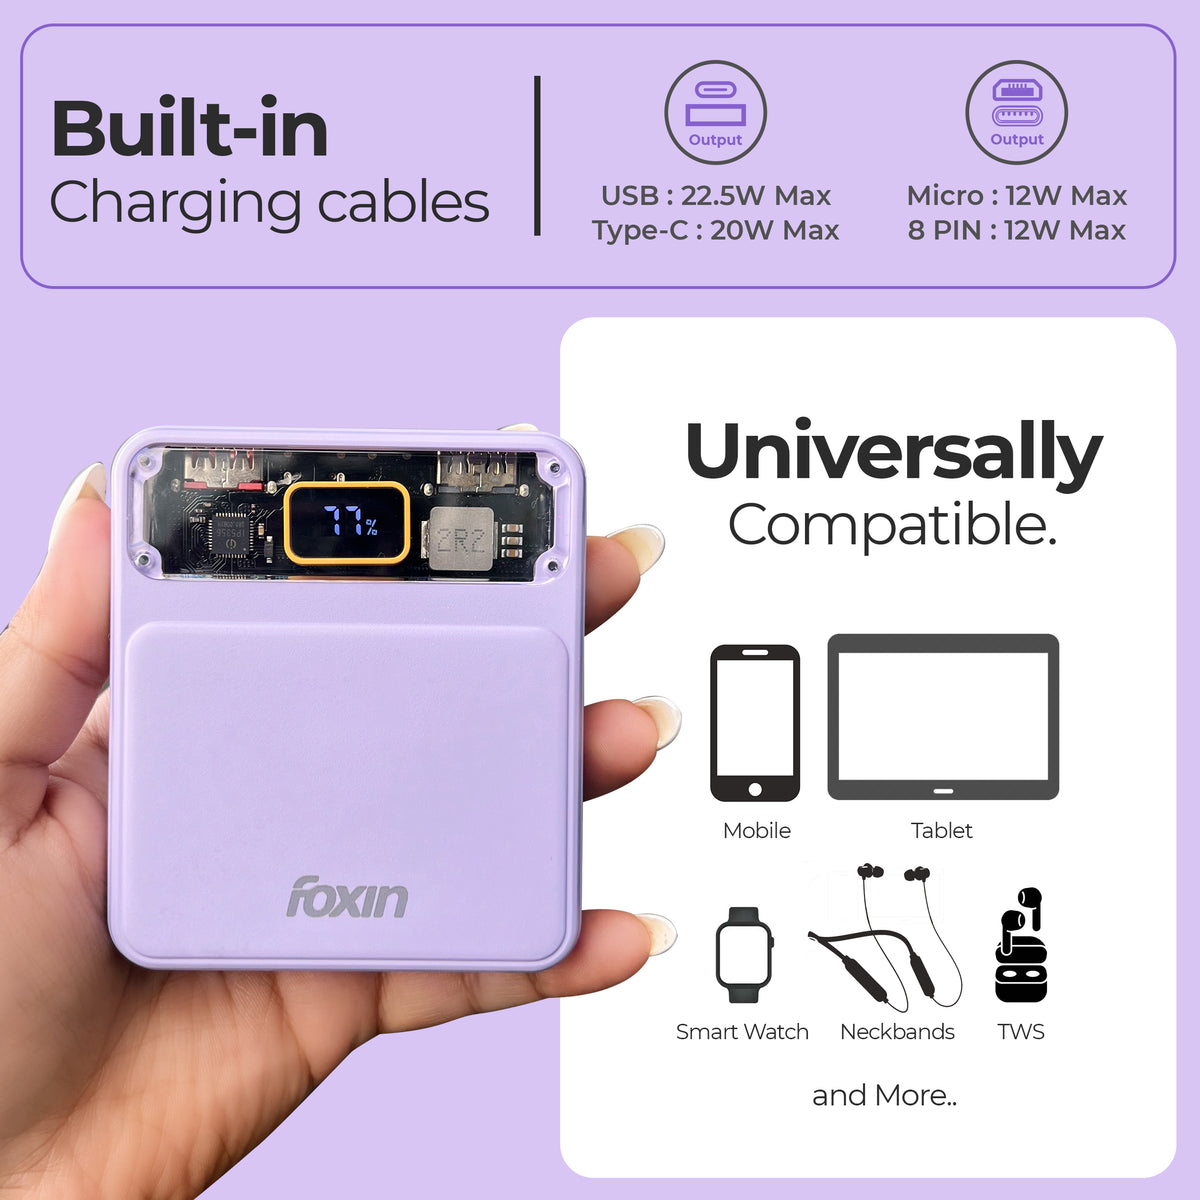 Foxin All-In-One 22.5W QC+PD Power Bank with Built-in Charging Cables 10000 mAH - Compatible with all Phone Models | SuperVOOC, BIS Certified